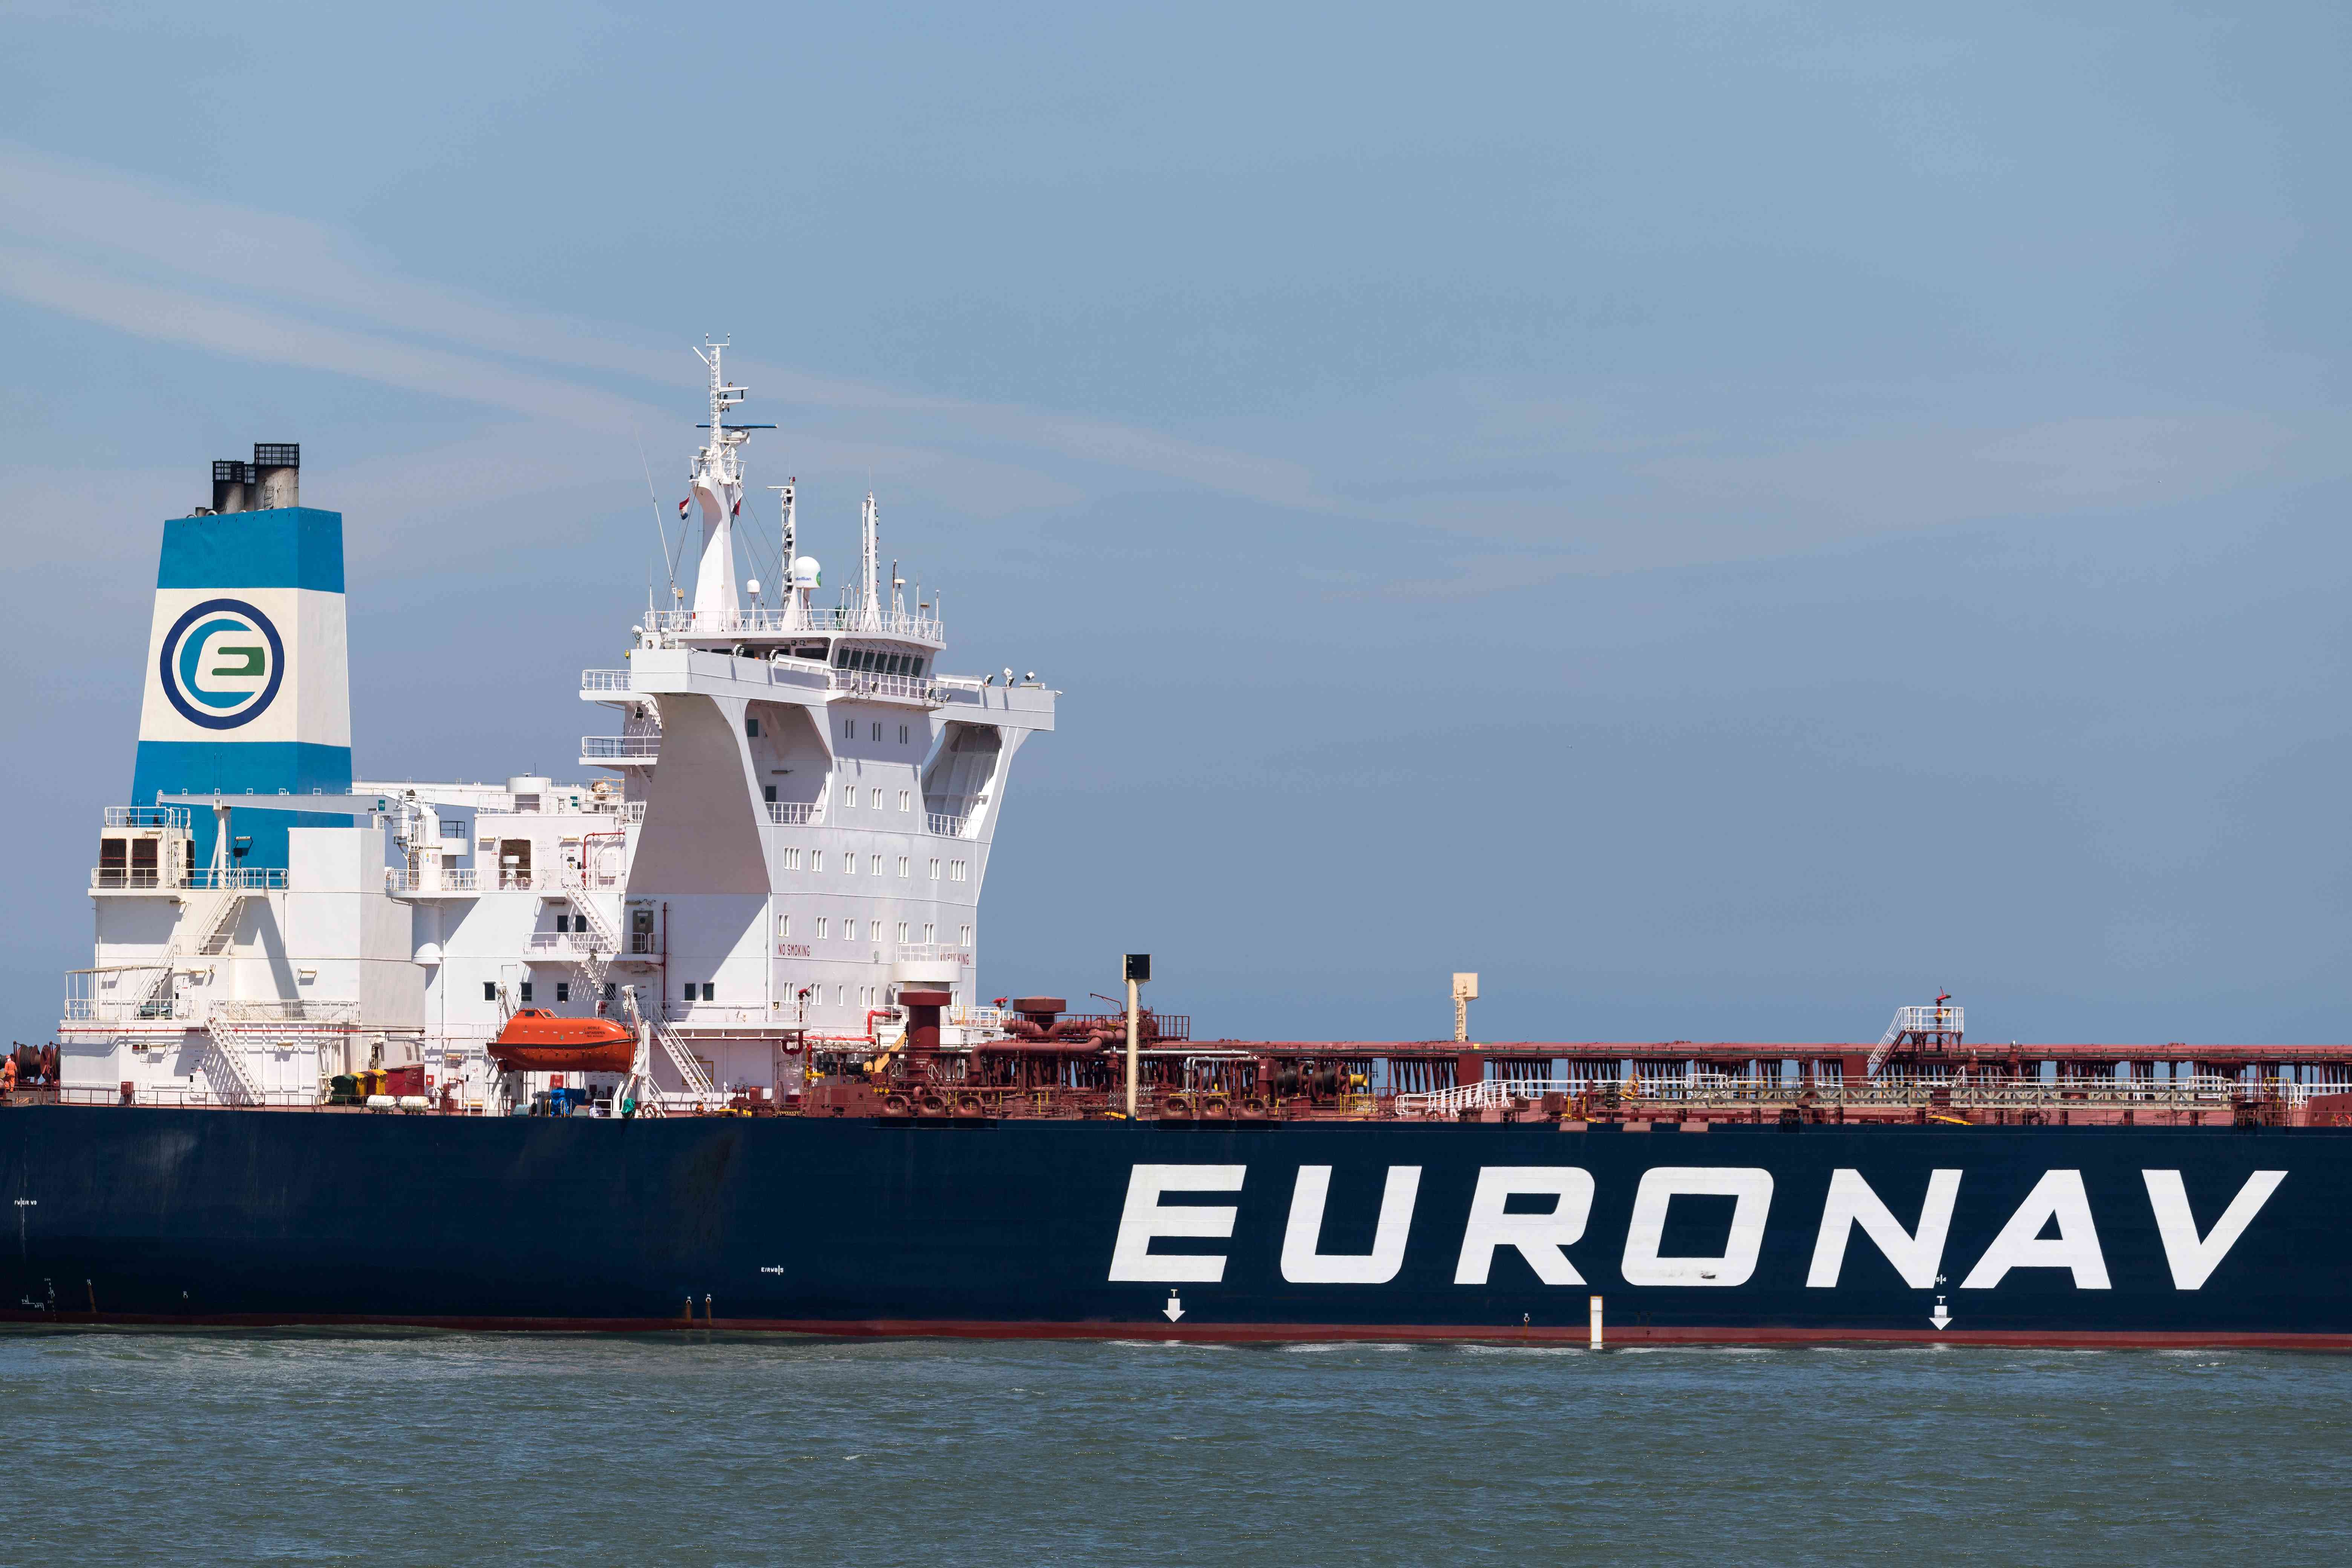 A tanker labeled with the name Euronav is pictured in the water.